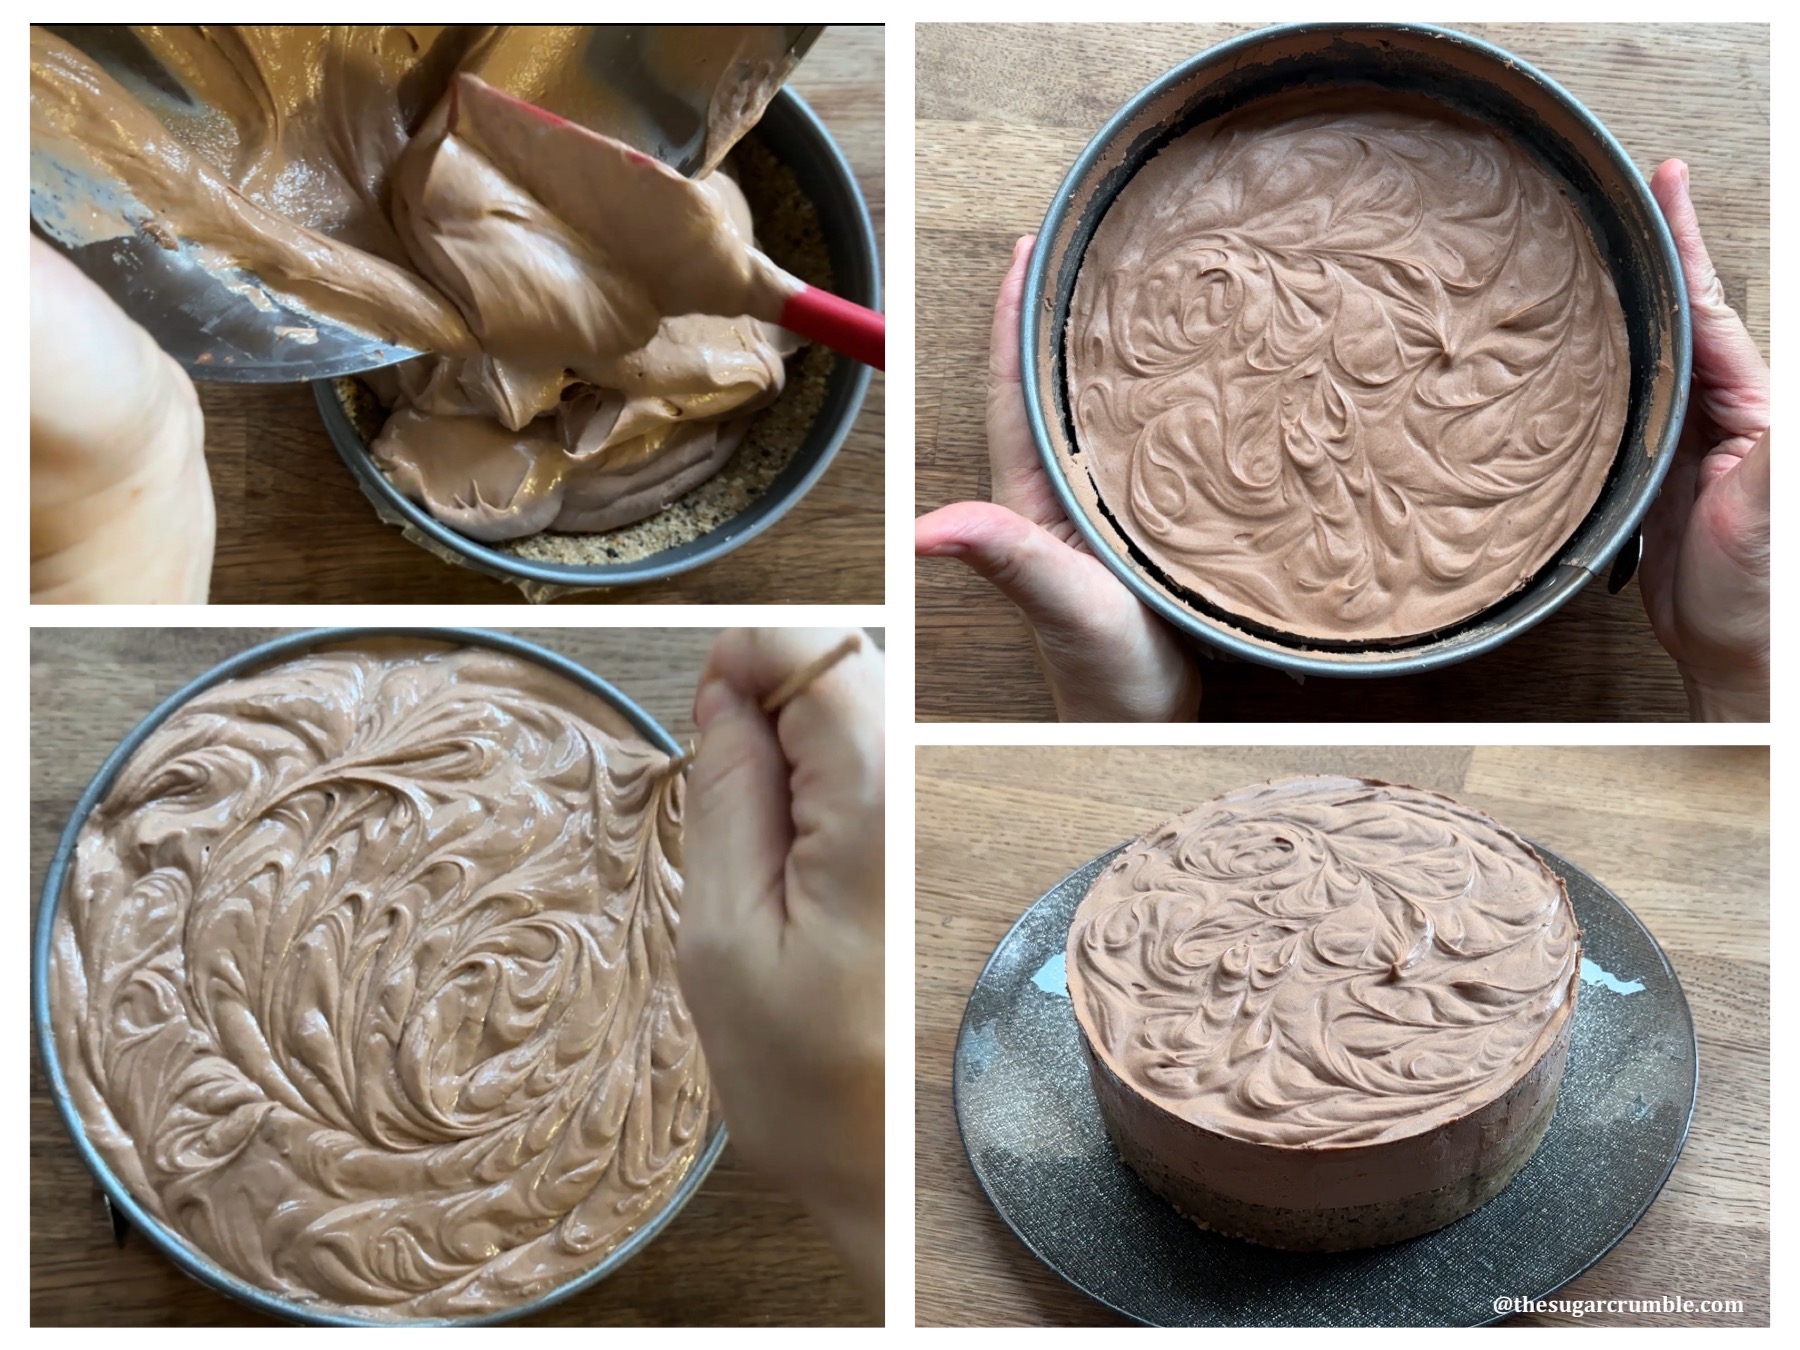 Un-moulding the nutella cheesecake